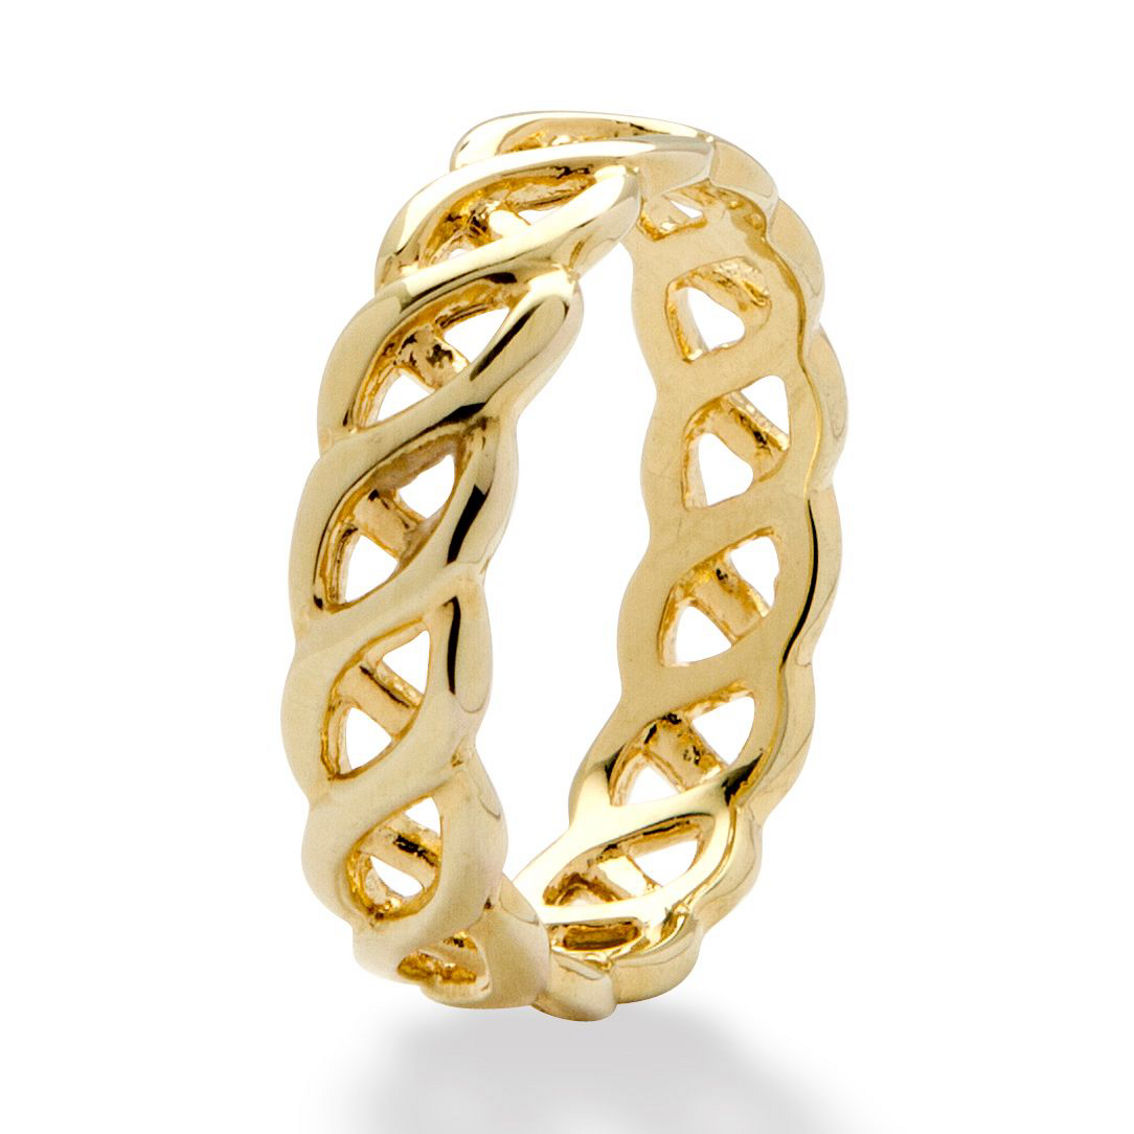 Gold-Plated Braided Link Ring - Image 2 of 5